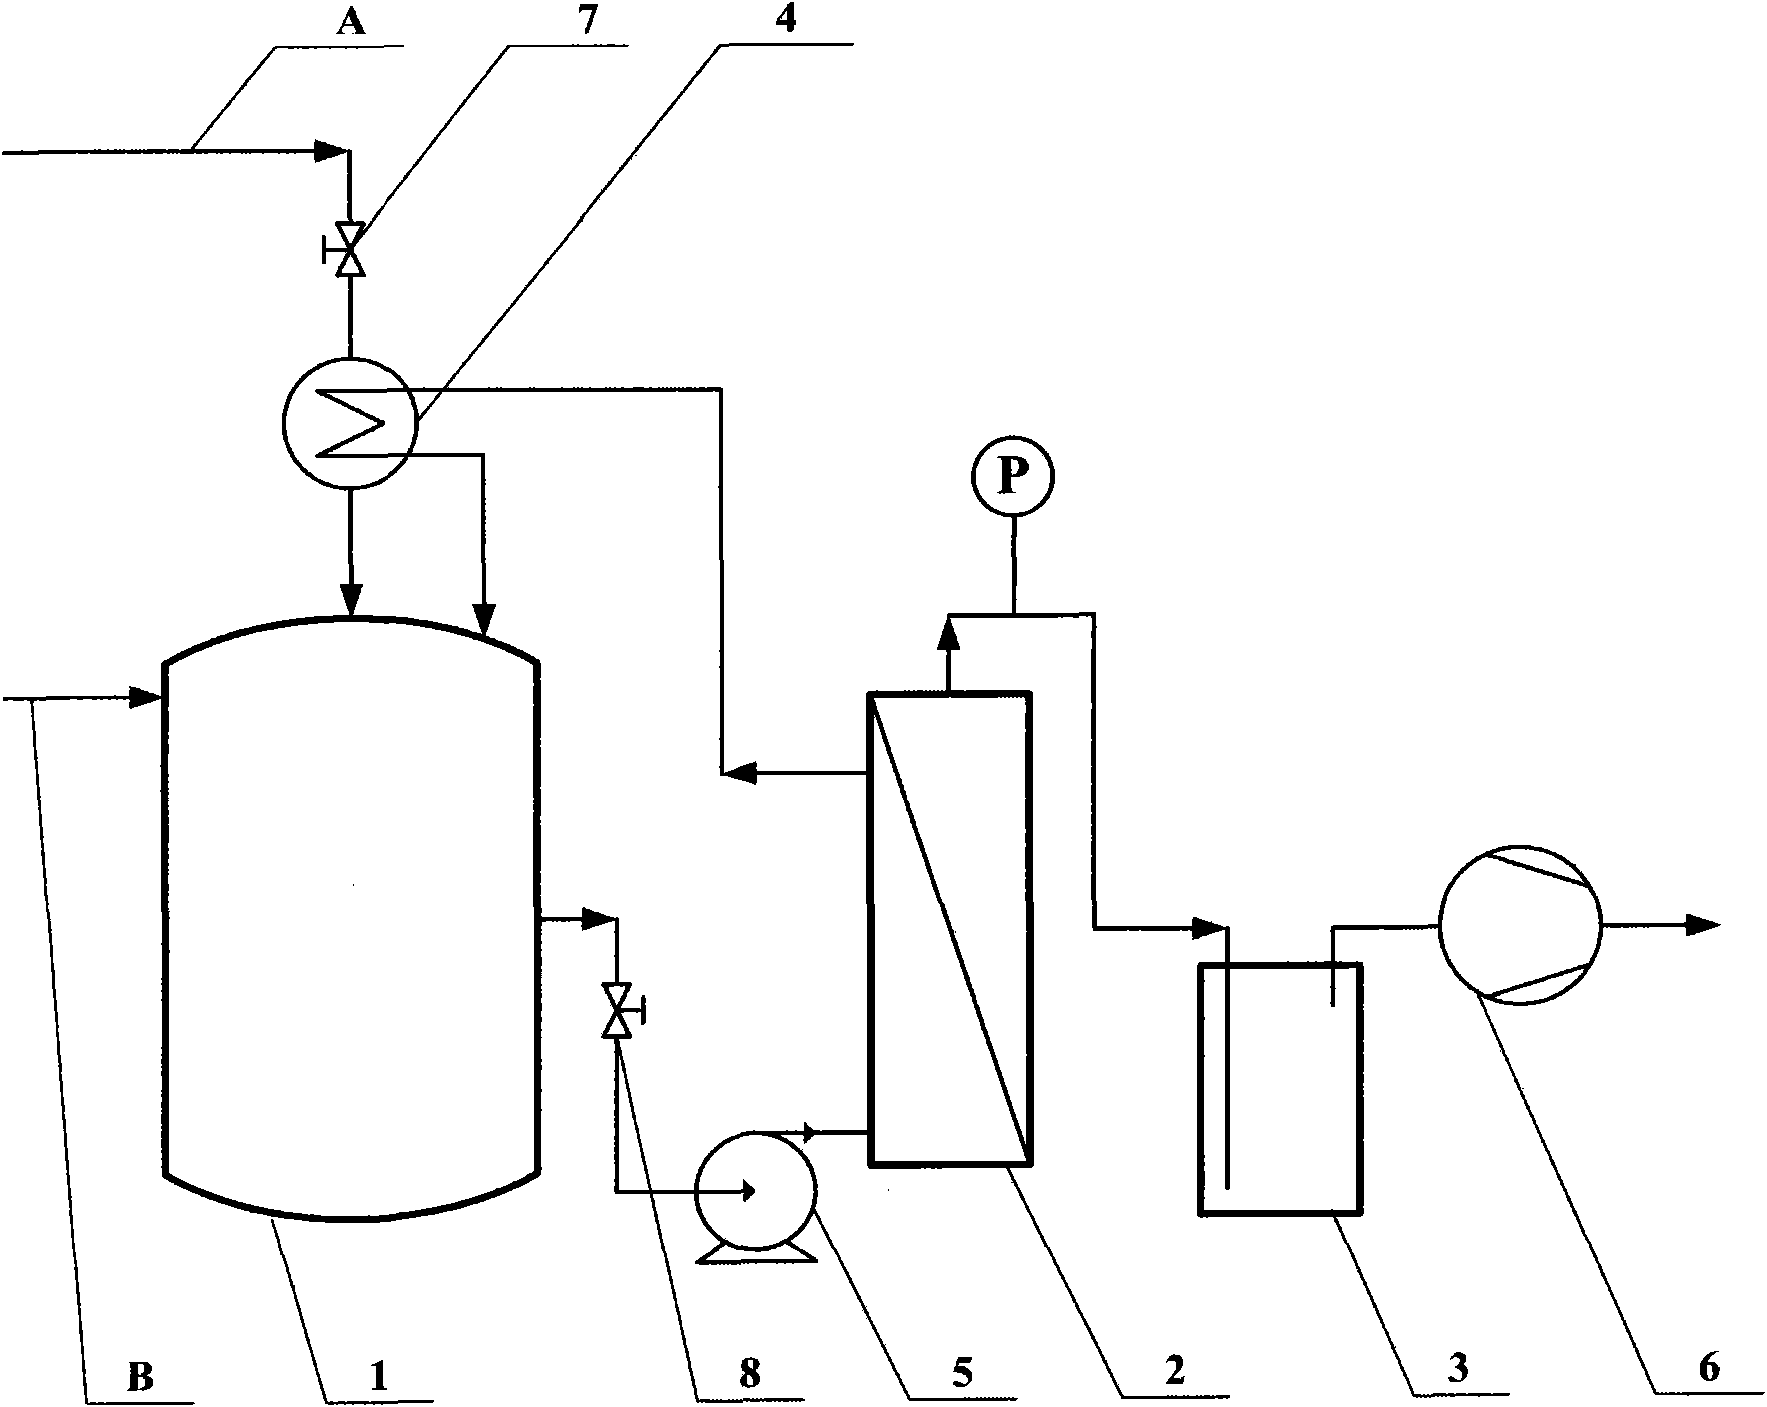 Process for separating acetone, butanol and ethanol in situ by coupling biomass fermentation and pervaporation